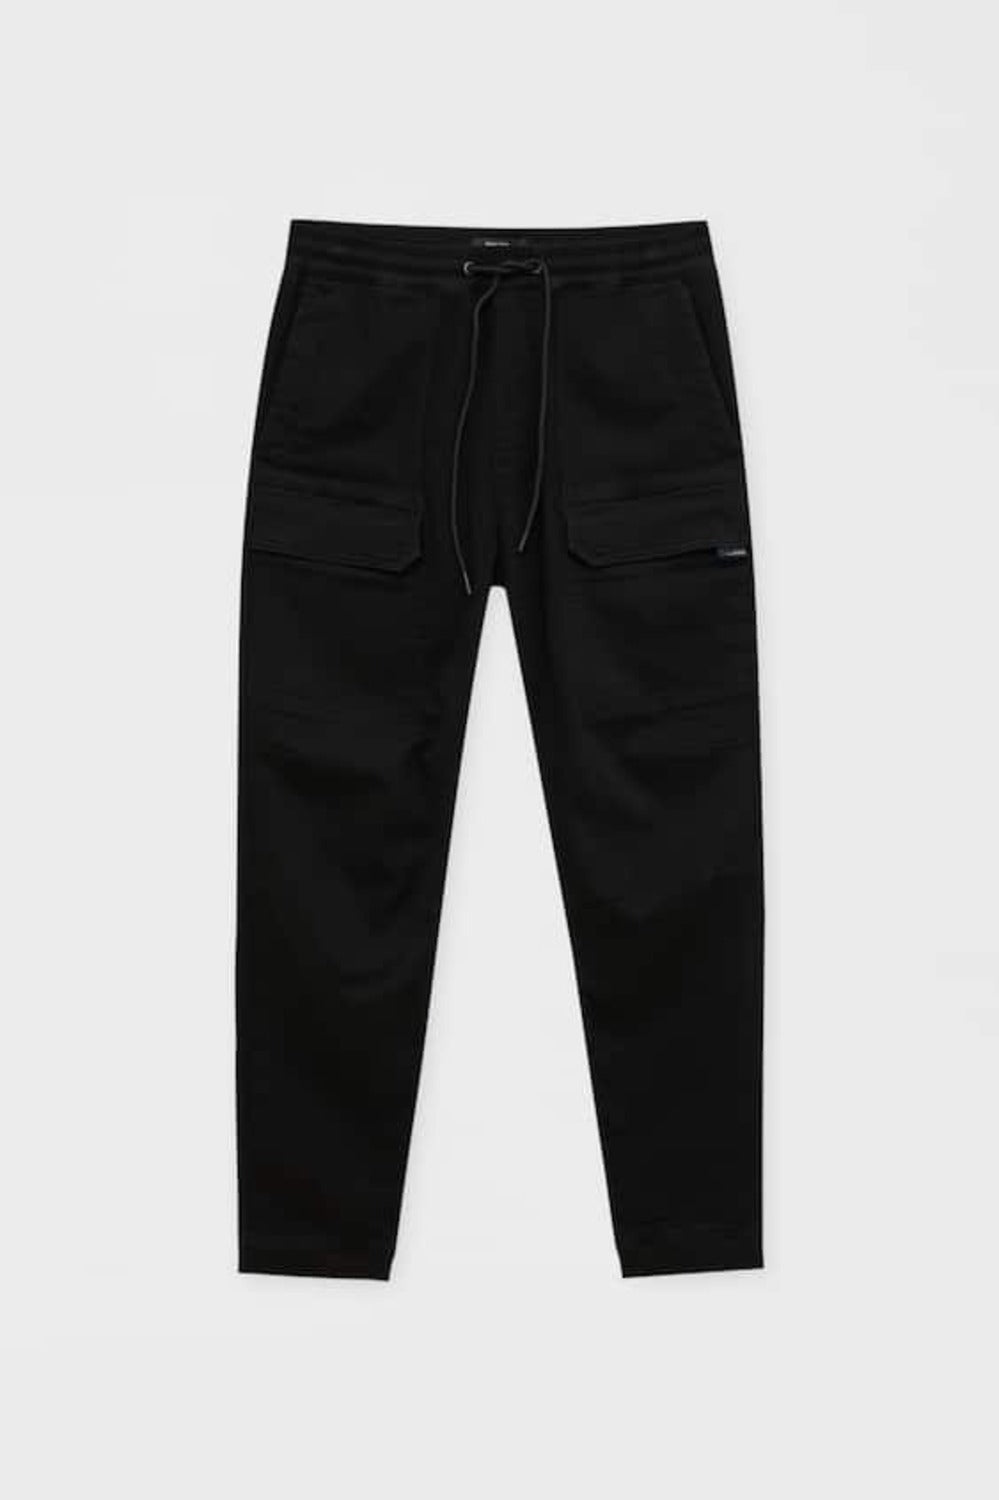 Stone Island 313l1 T.co+old Cargo Trousers Black V0029 - MEN from Onu UK